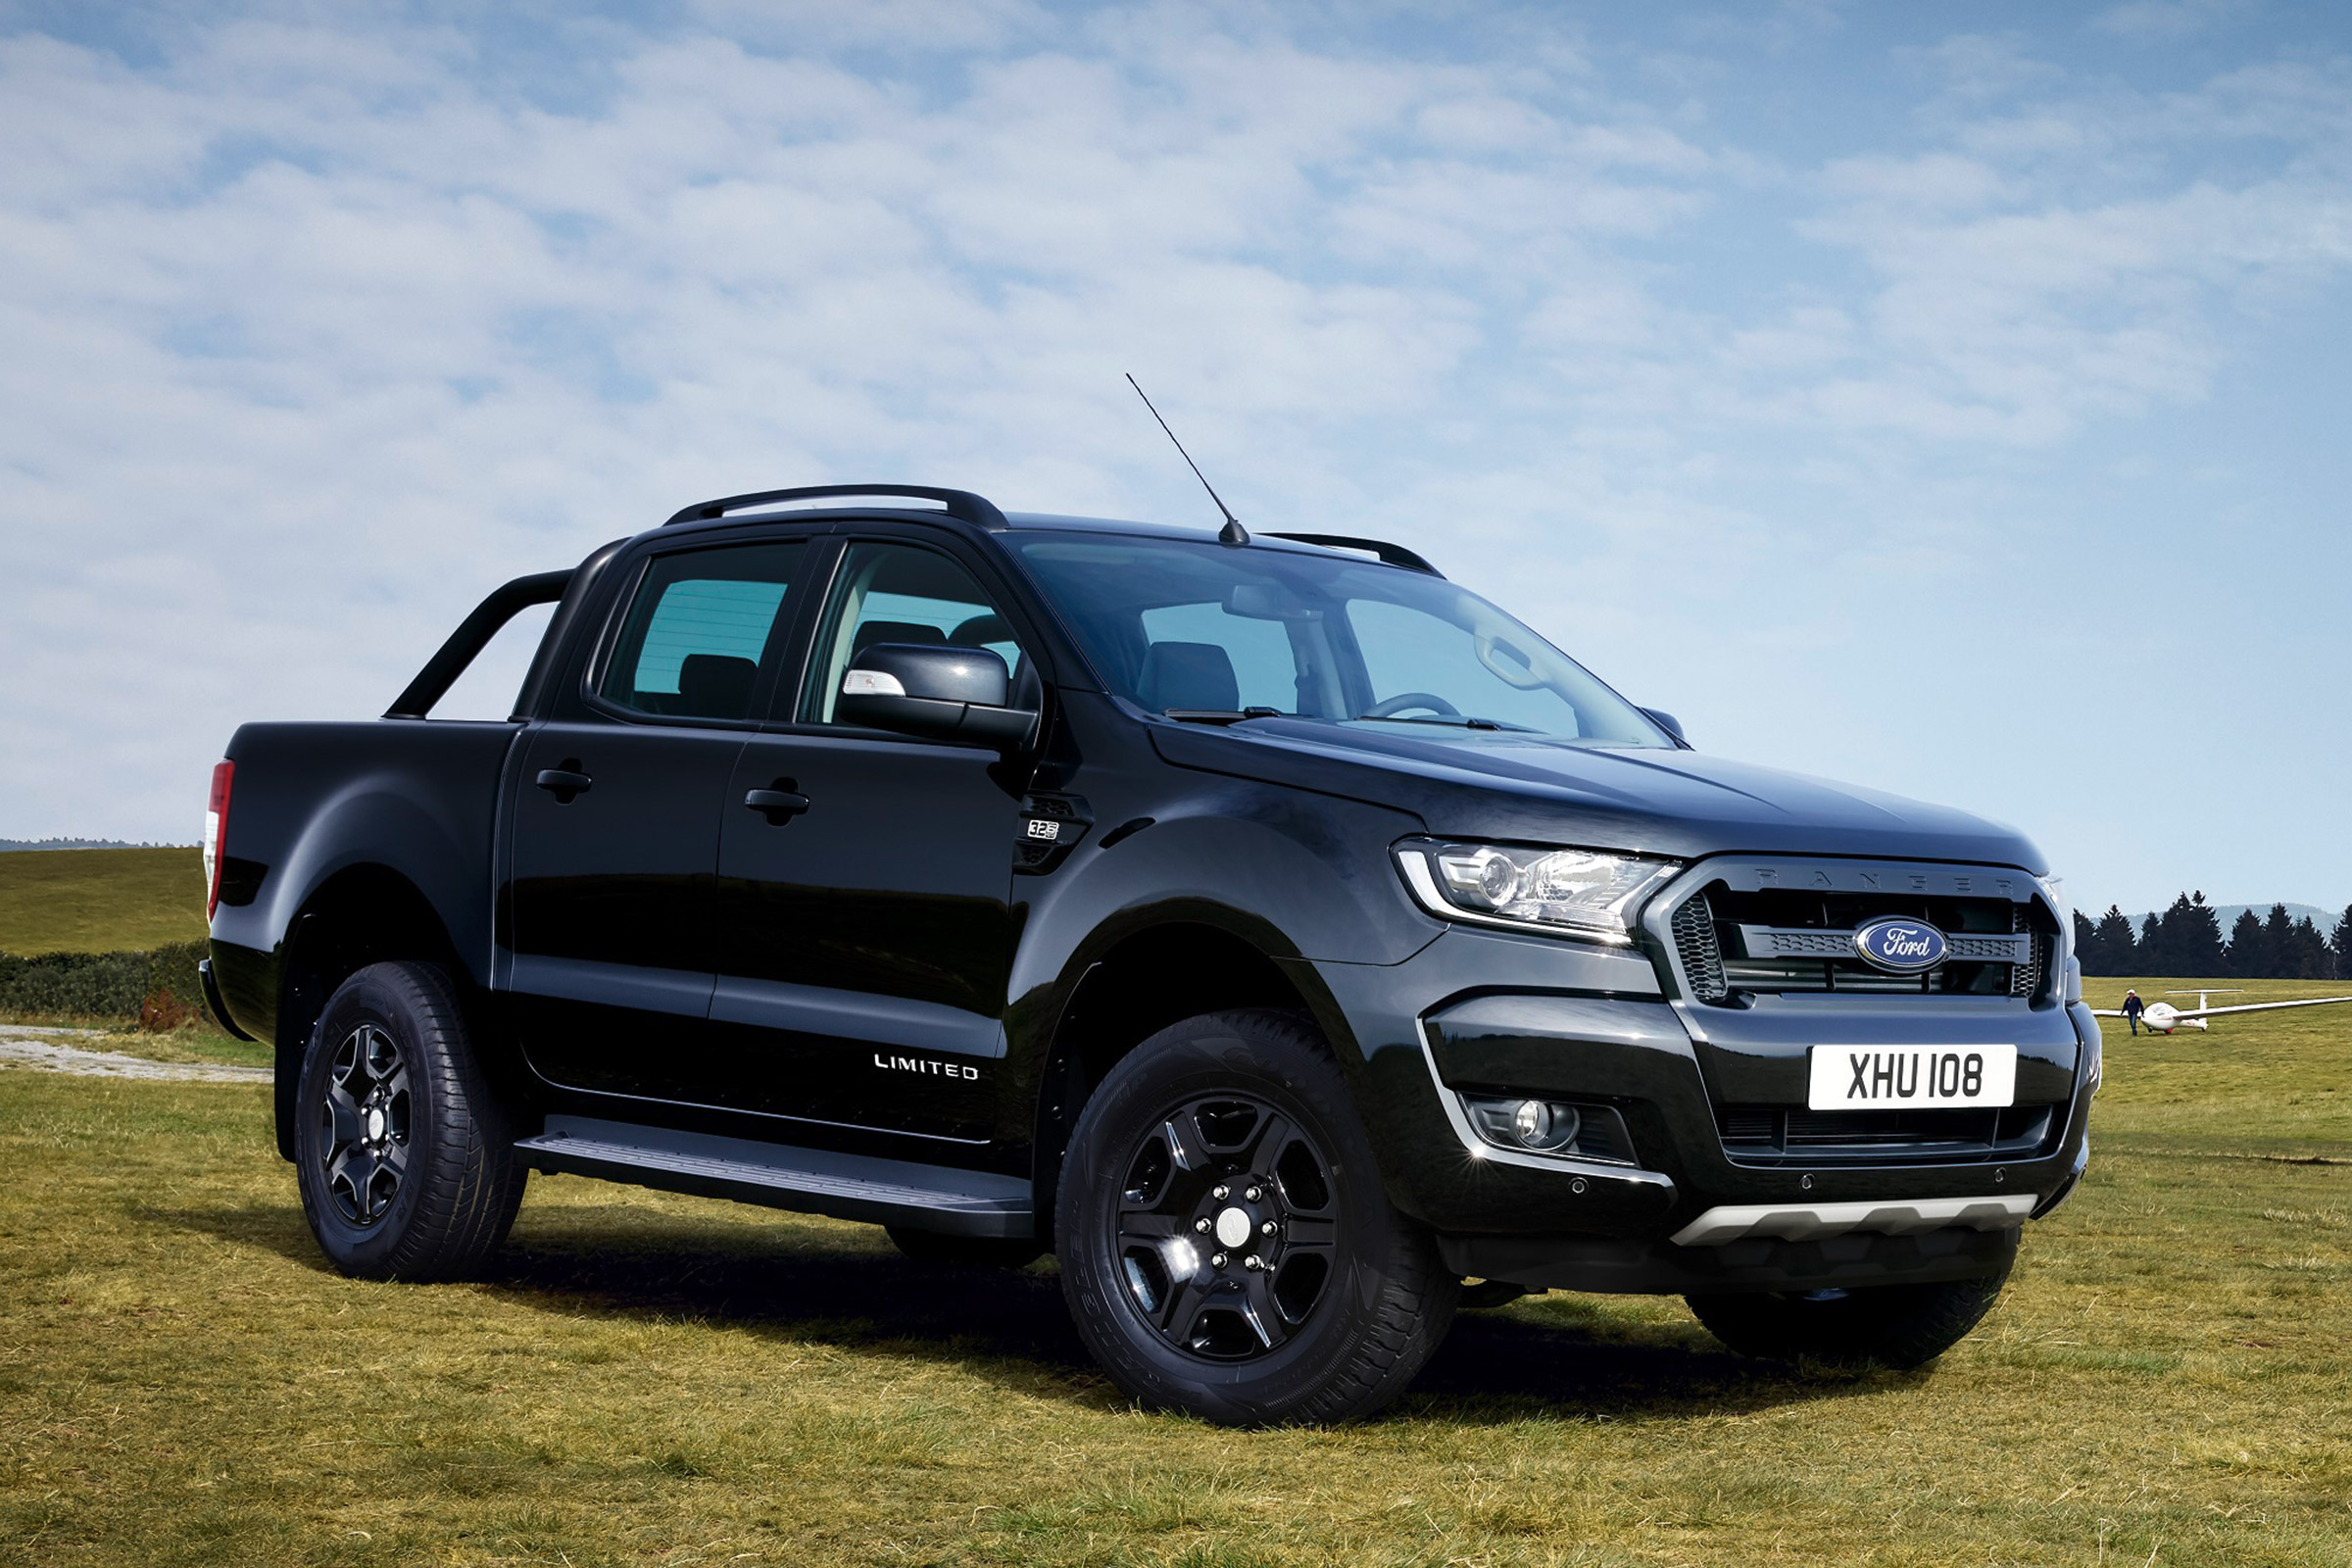 Limited Ford Ranger Black Edition pickup truck revealed Auto Express